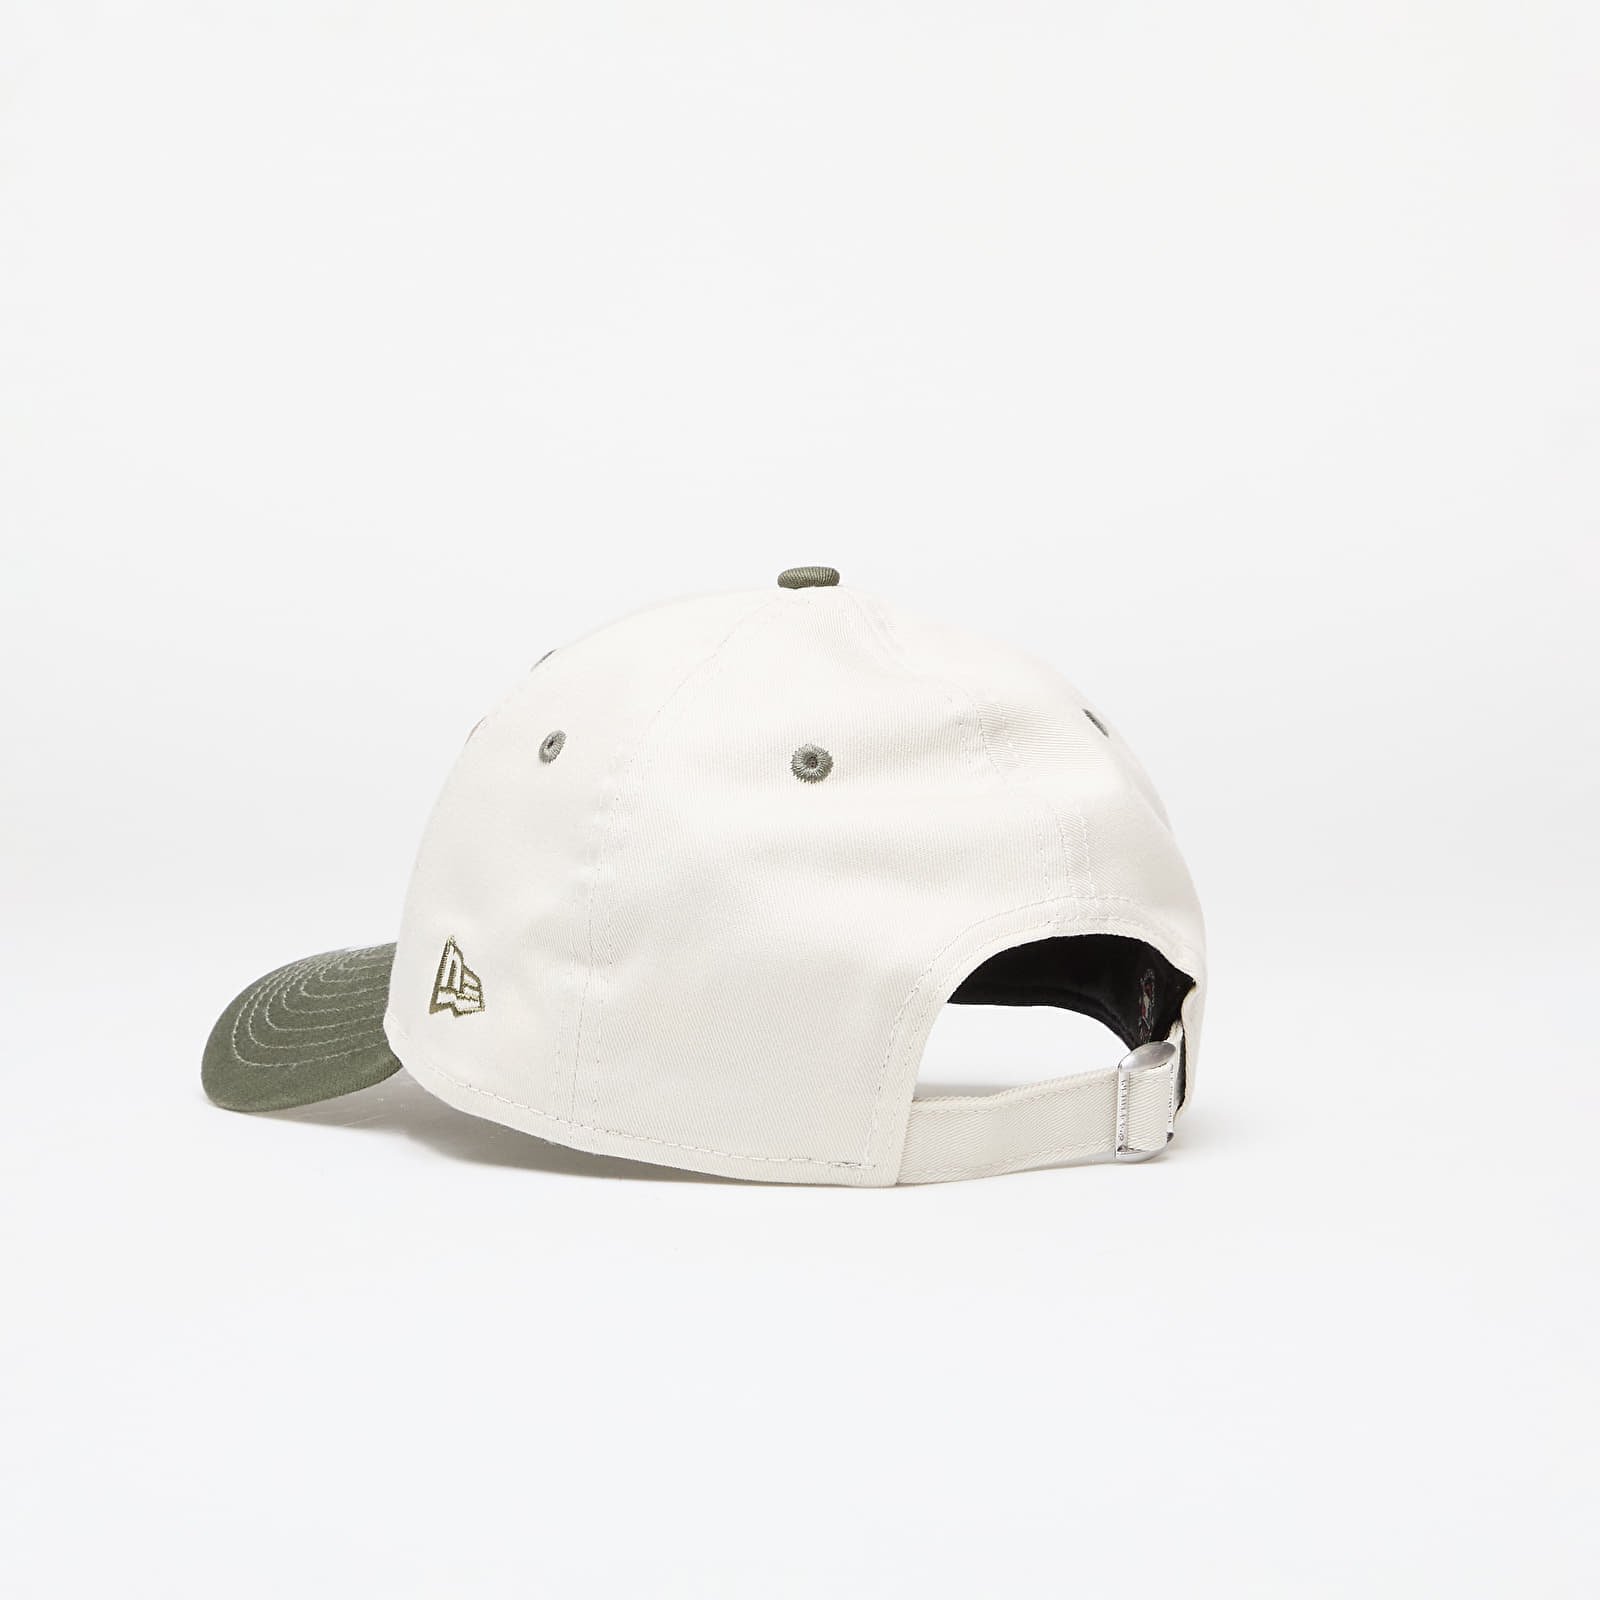 New York Yankees White Crown 9FORTY Adjustable Cap